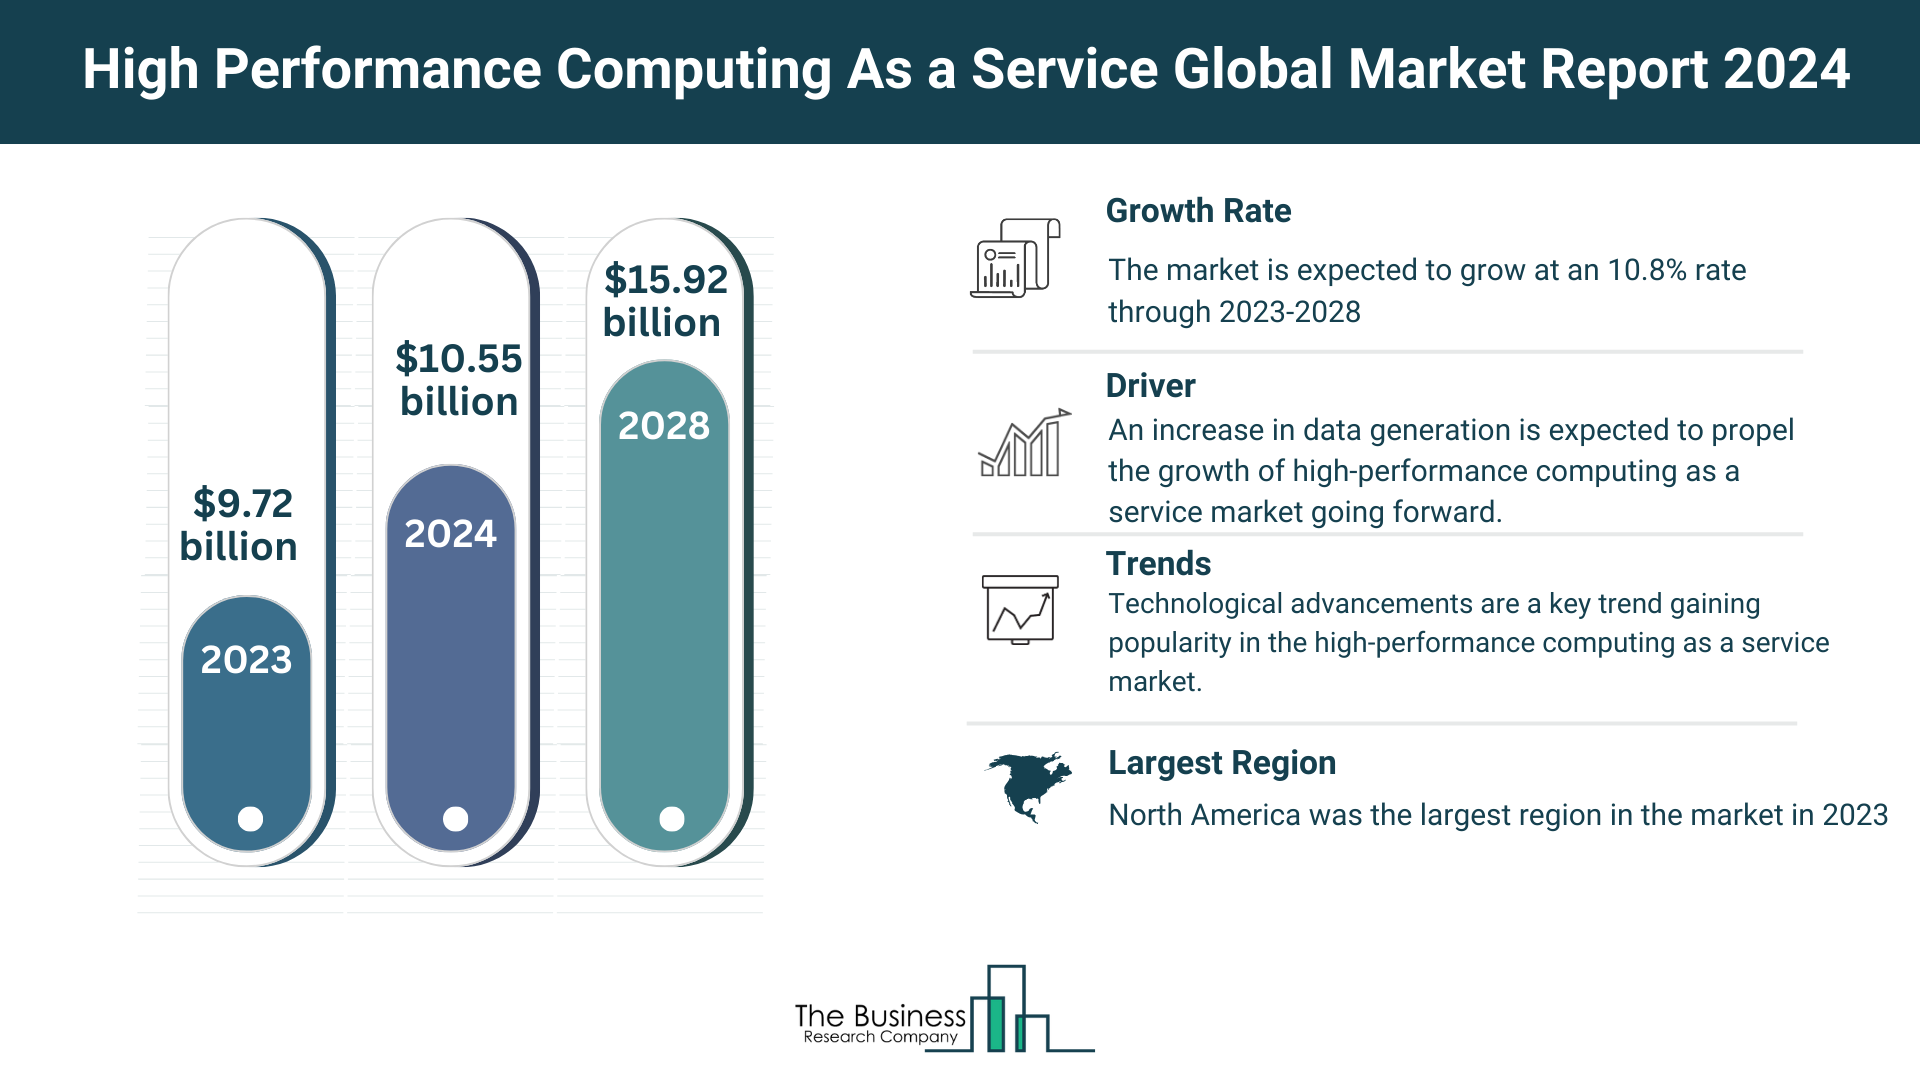 Global High Performance Computing As a Service Market